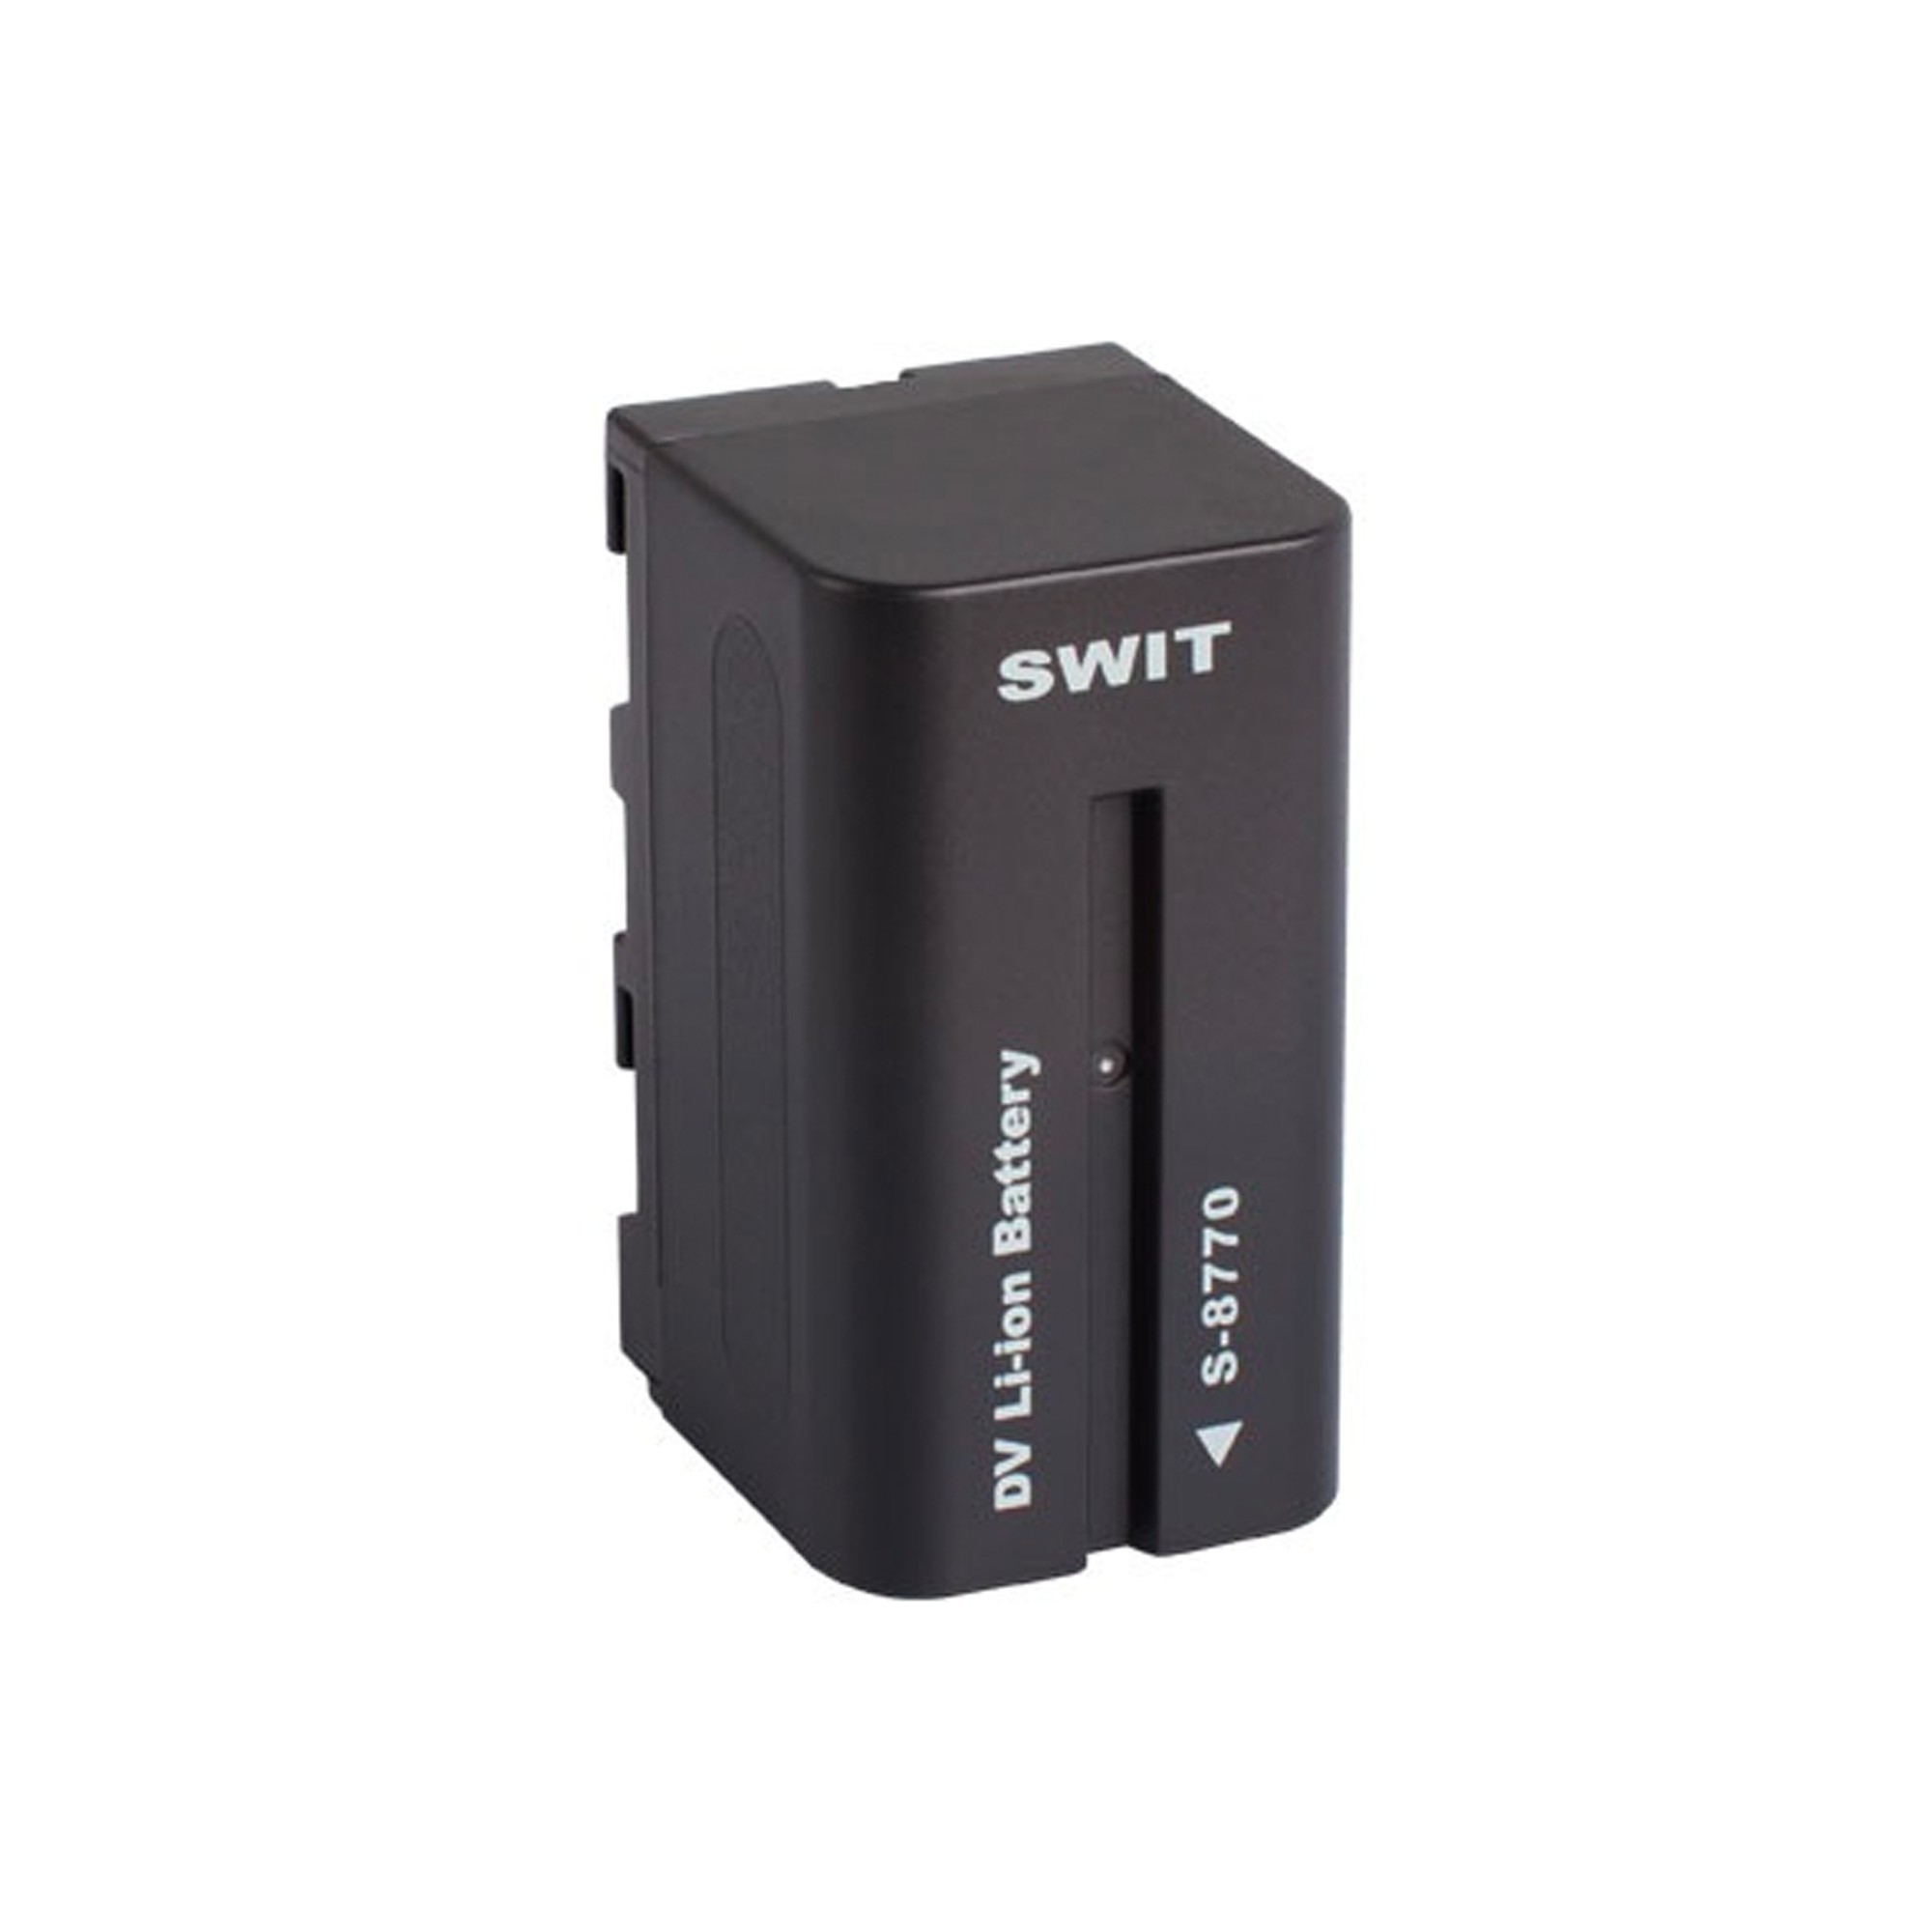 SWIT S-8770 Battery for NP-F770 Sony